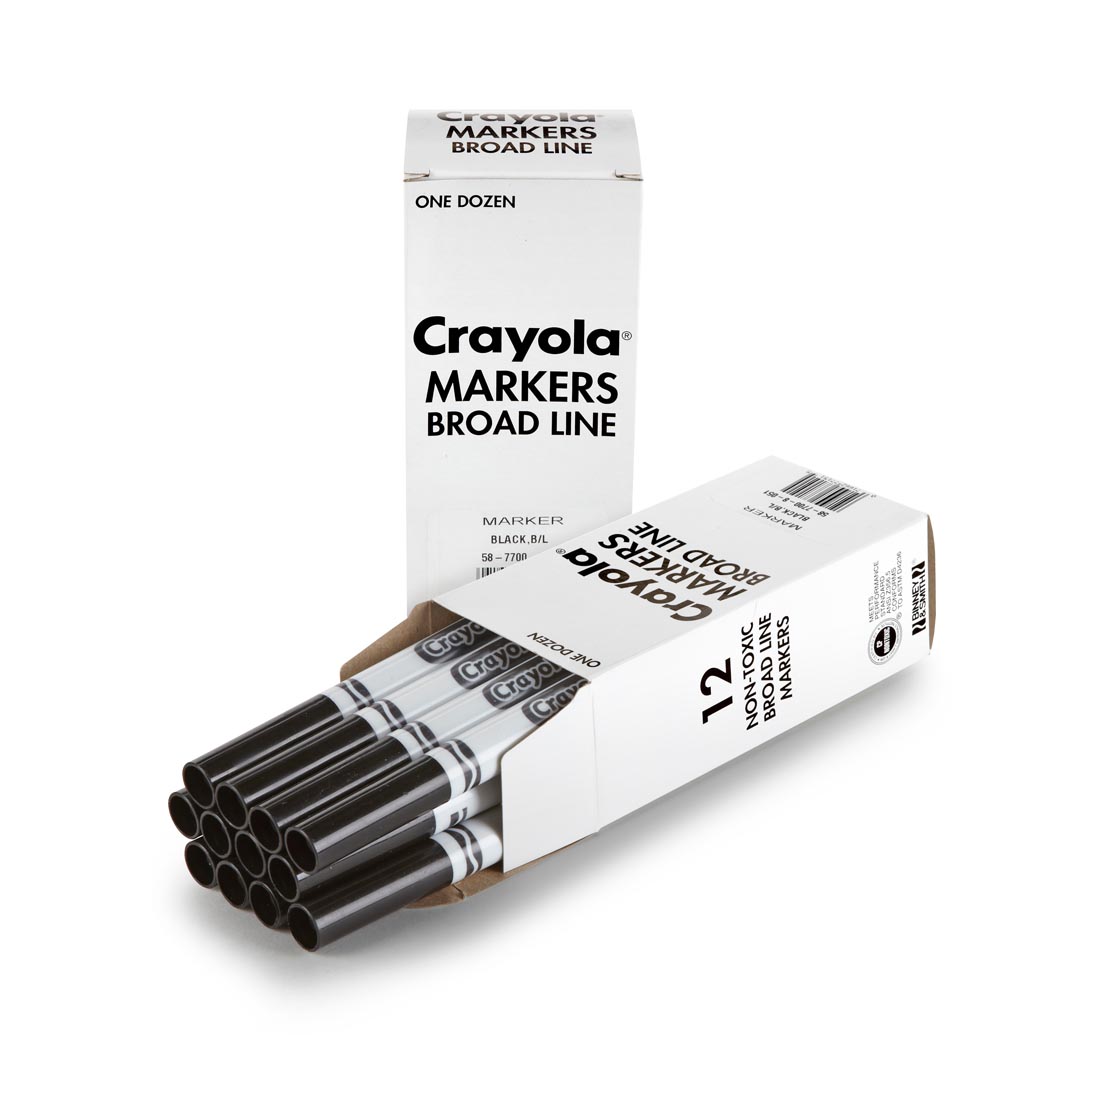 Box of Crayola Broad Line Marker Refills shown both closed and open with 12 Black Markers